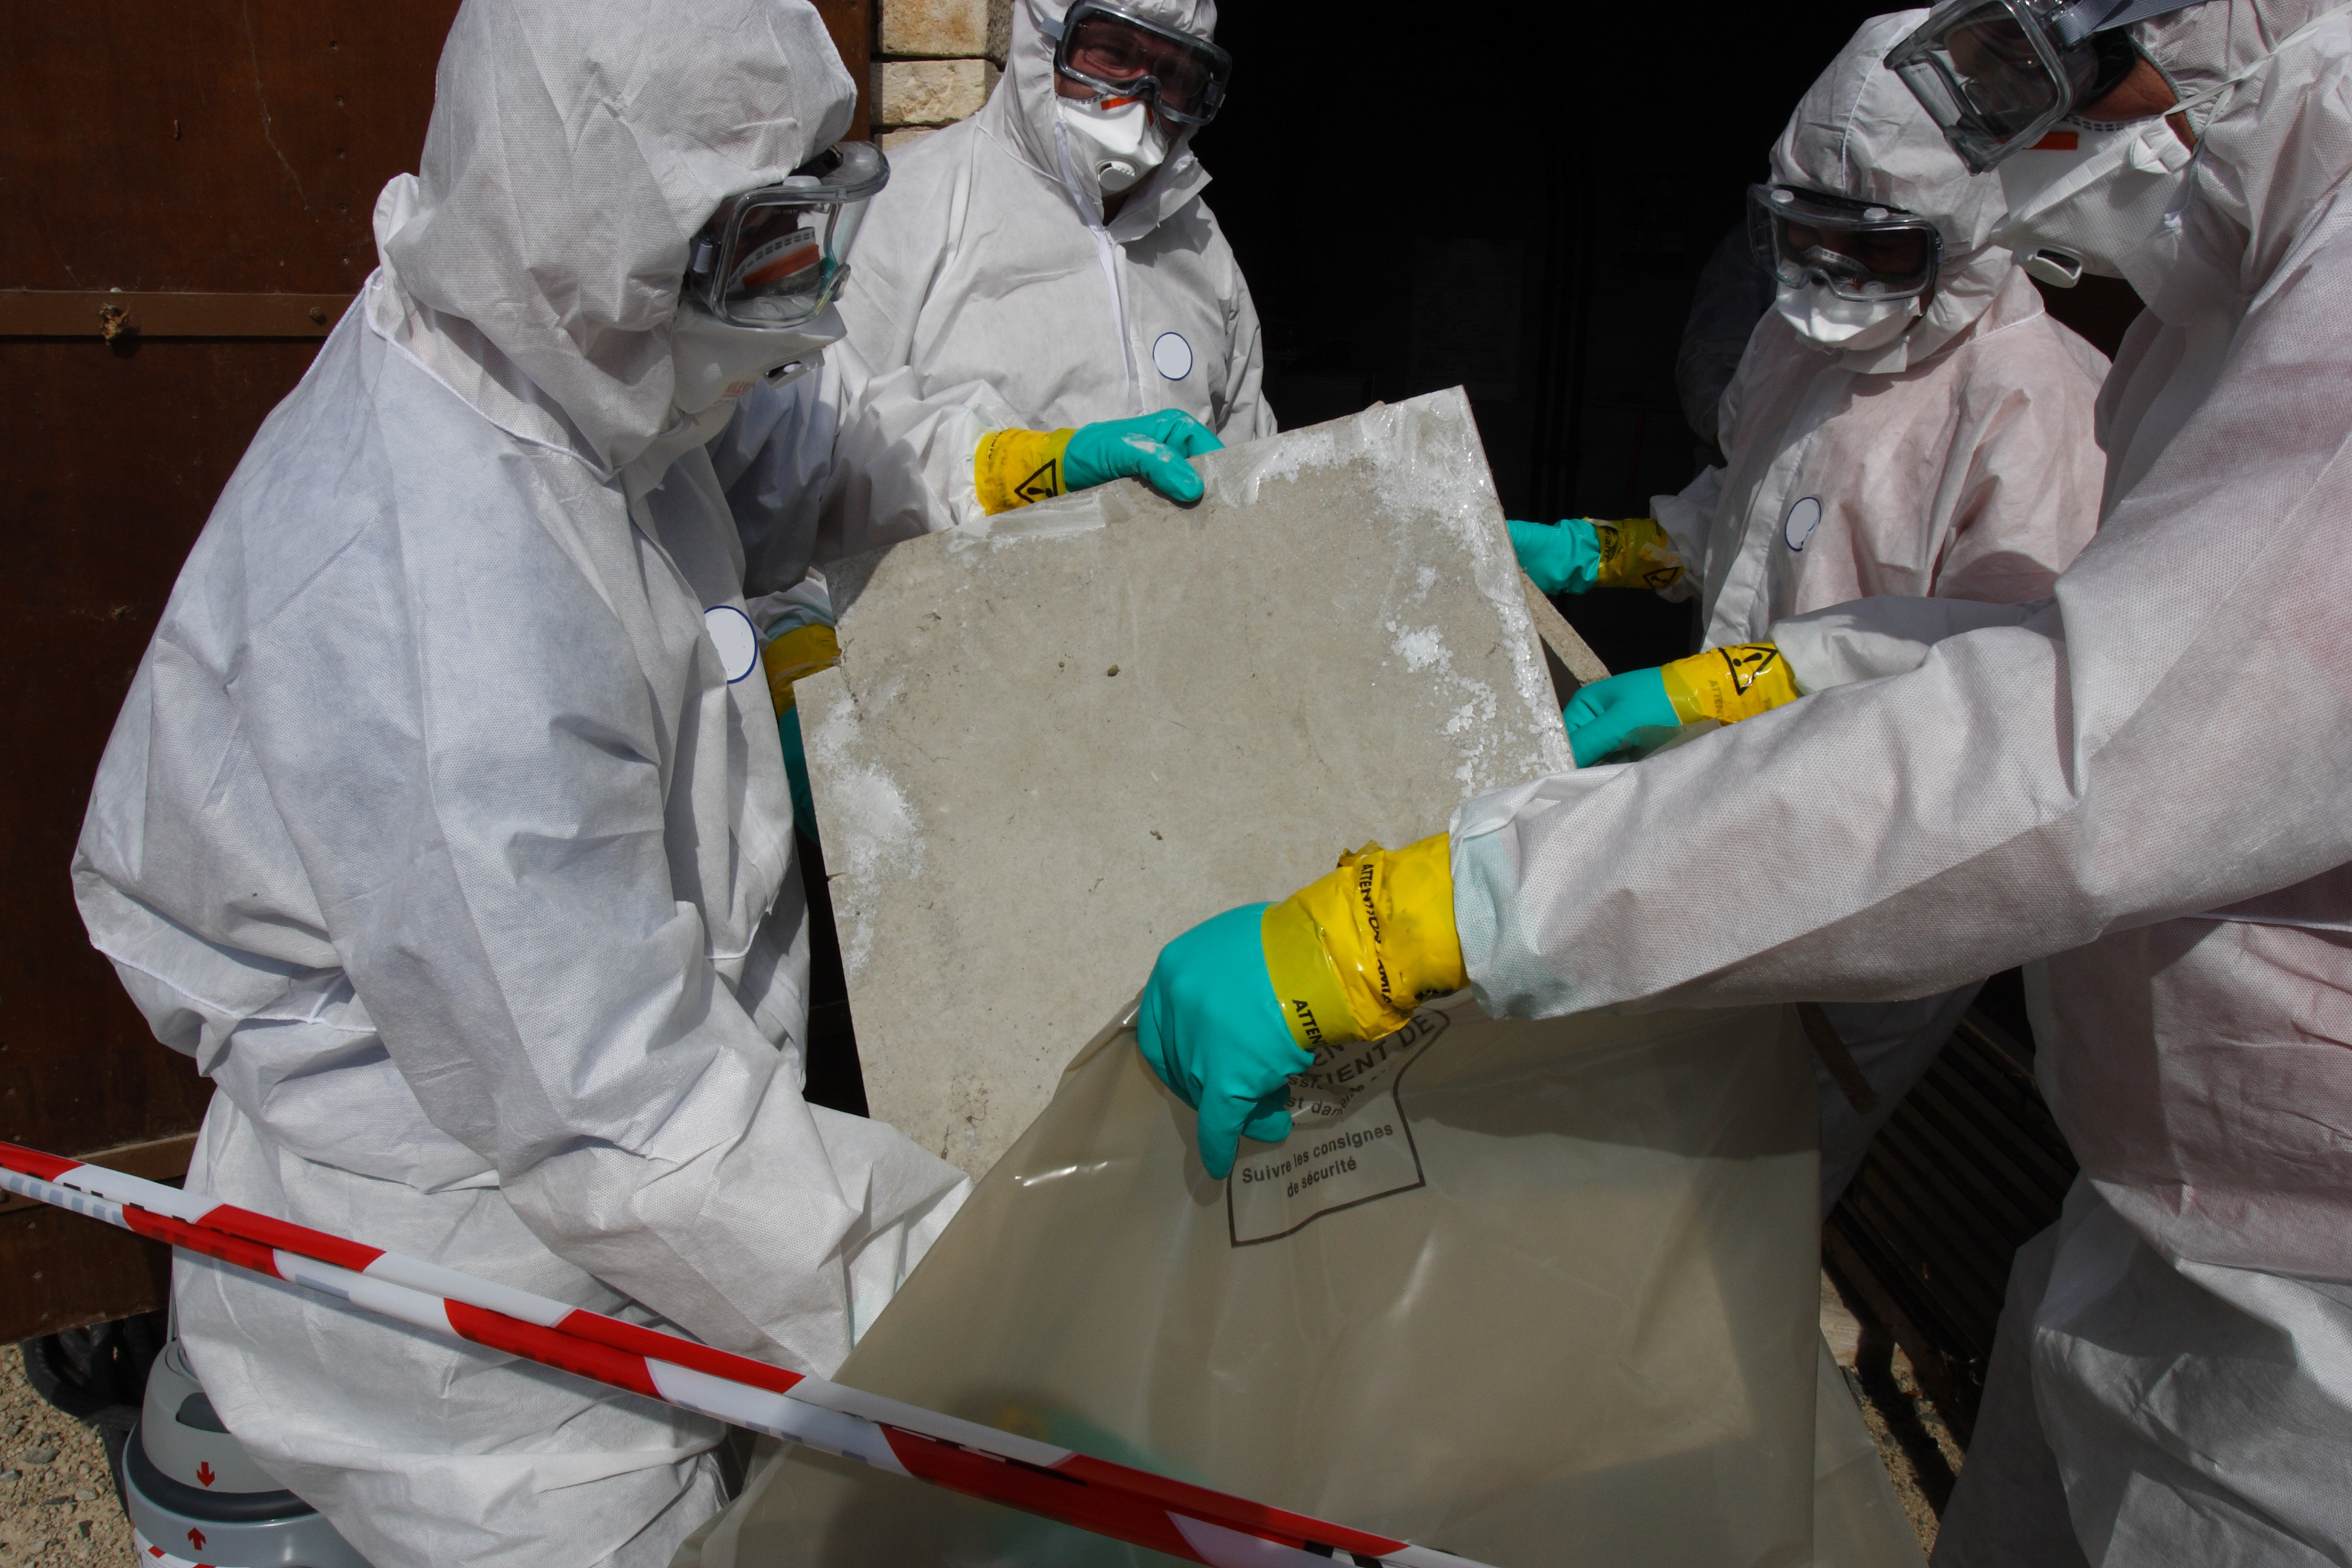 A group of workers in PPE looks for asbestos in homes by performing an asbestos inspection for homeowners.